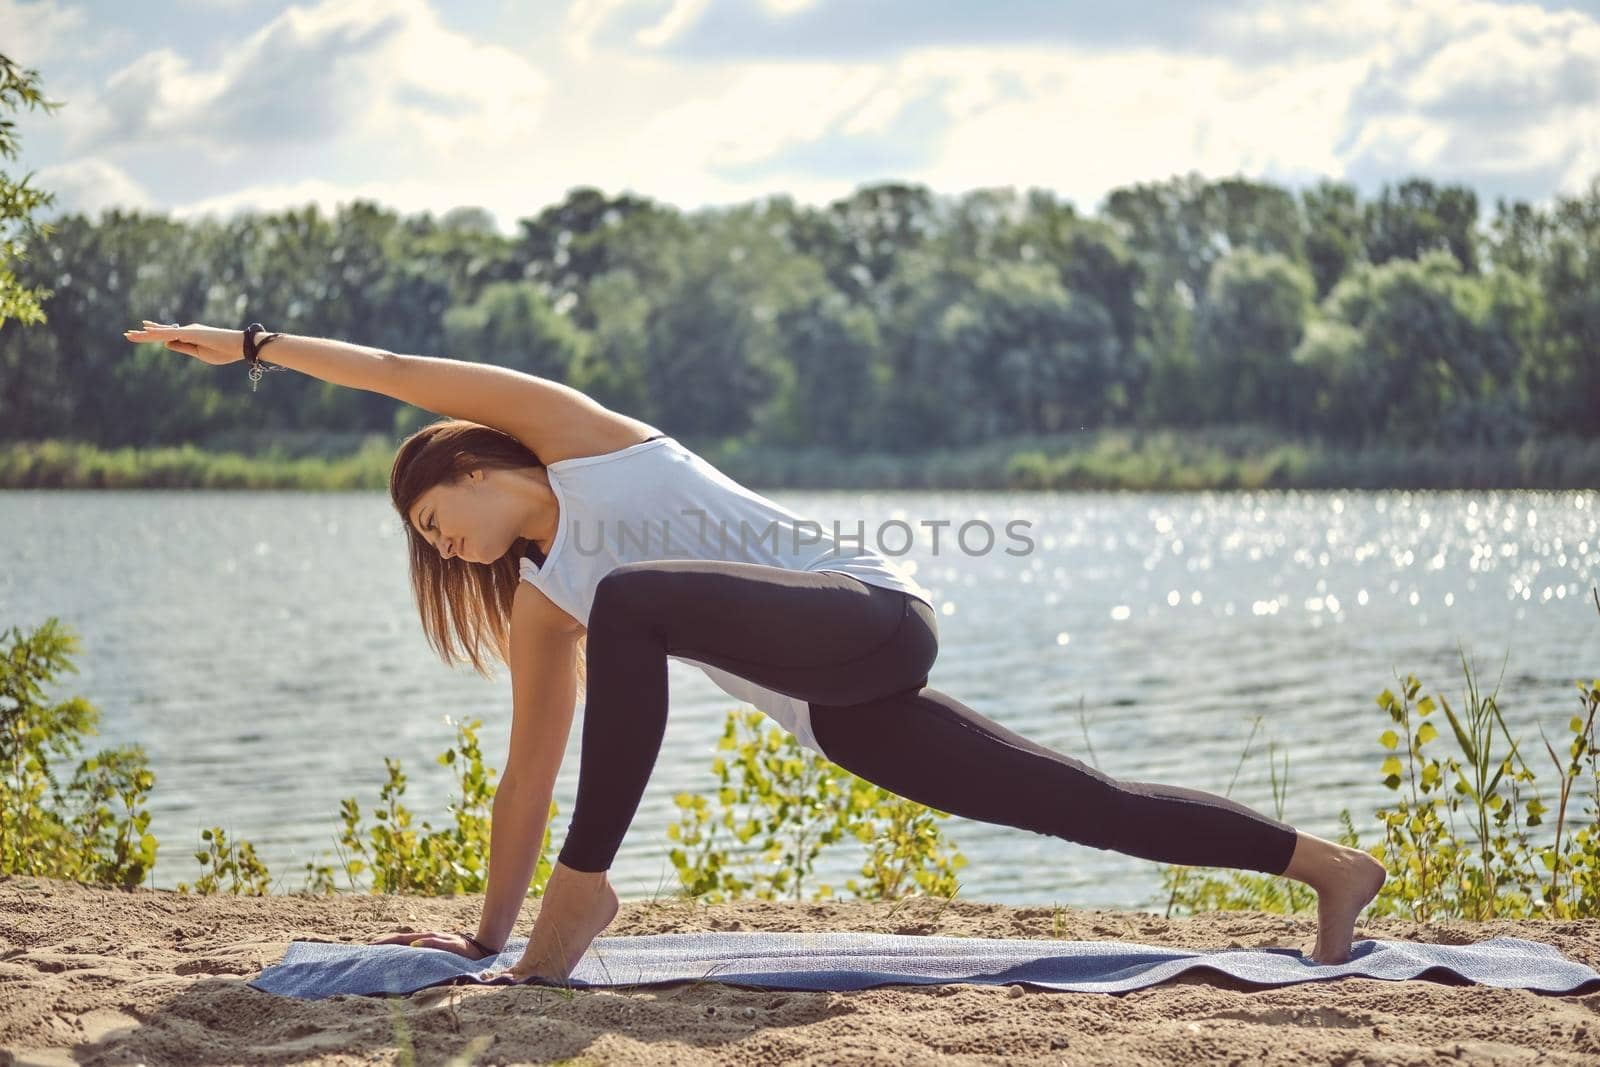 Graceful dark-haired maiden in white undershirt and black leggings is practicing yoga performing yoga-asanas and doing stretching on a mat laying on a sand near a riverside. Concept of healthy life and natural balance between body and mental development.